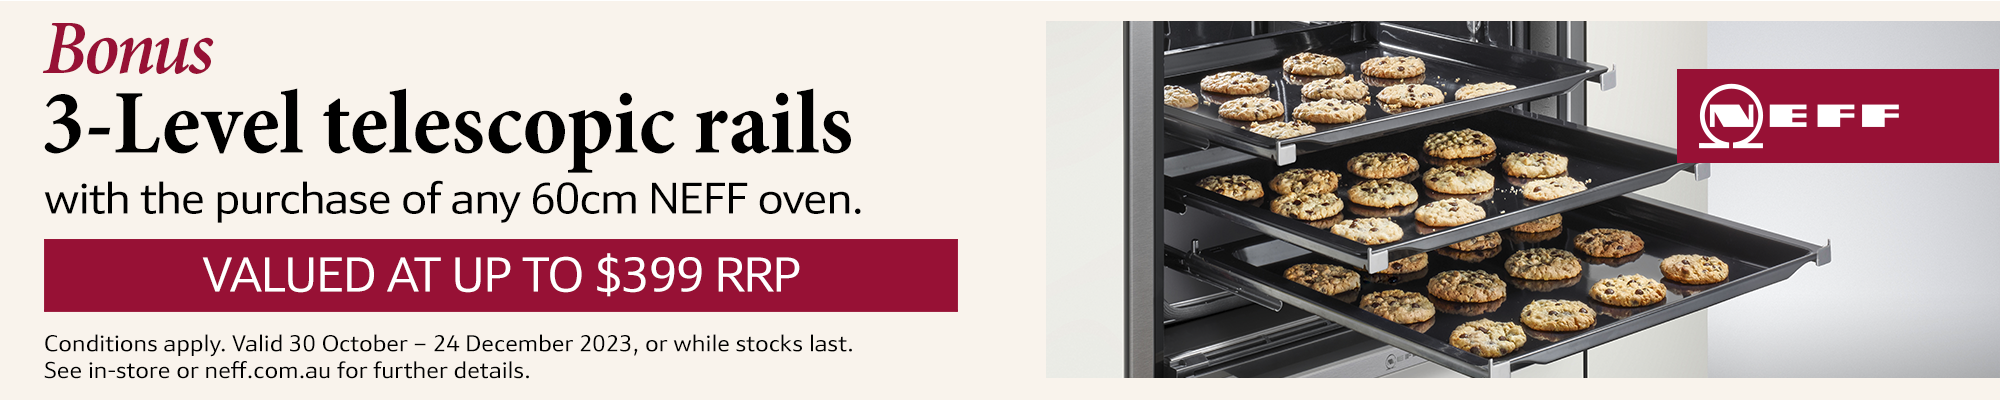 Bonus 3-Level Telescopic Rails Valued Up To $399 With The Purchase Of Any 60cm NEFF Oven